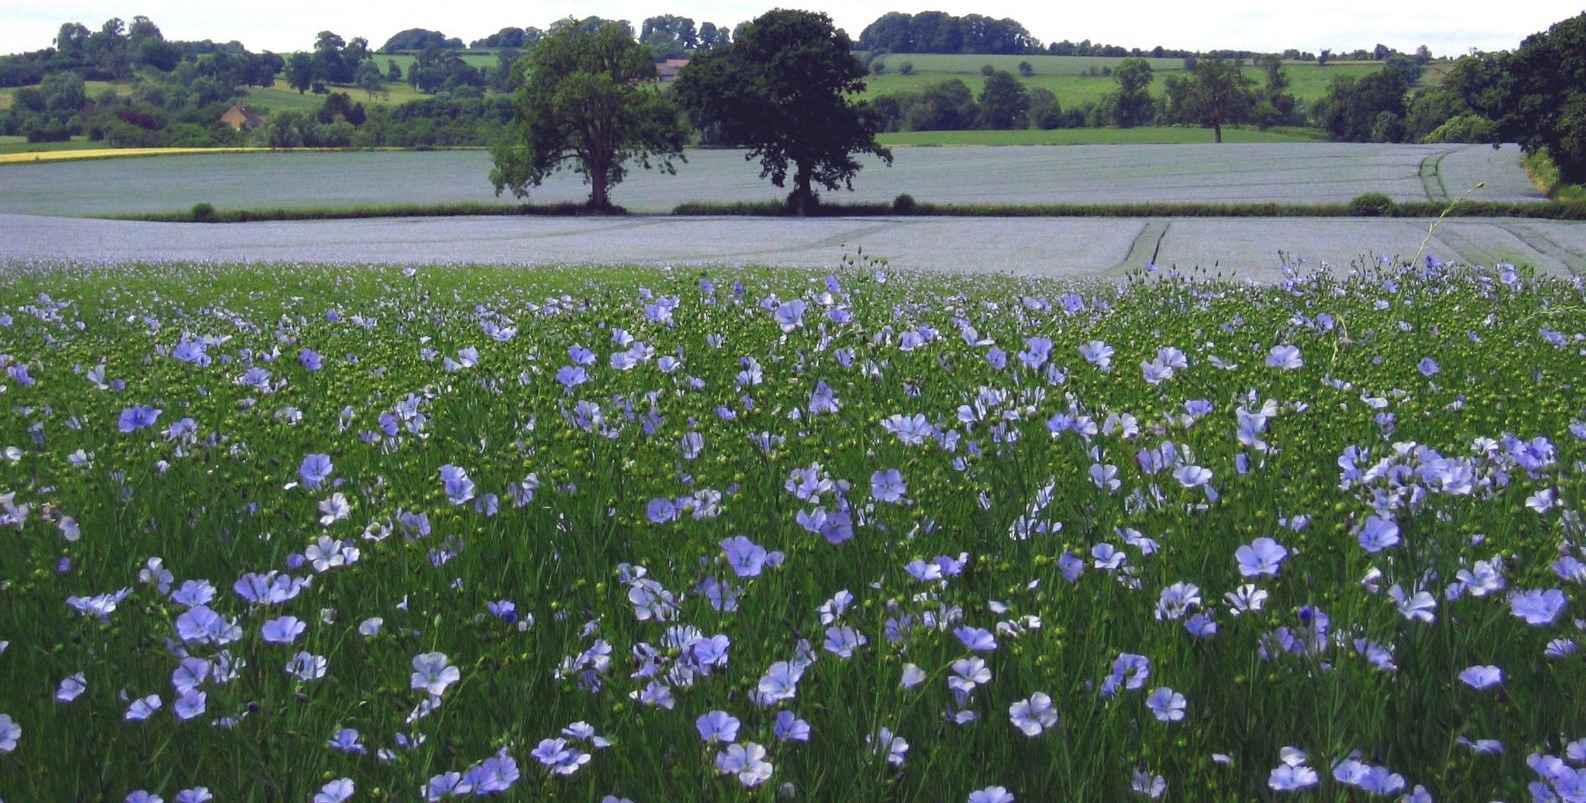 Linseed in bloom in the UK